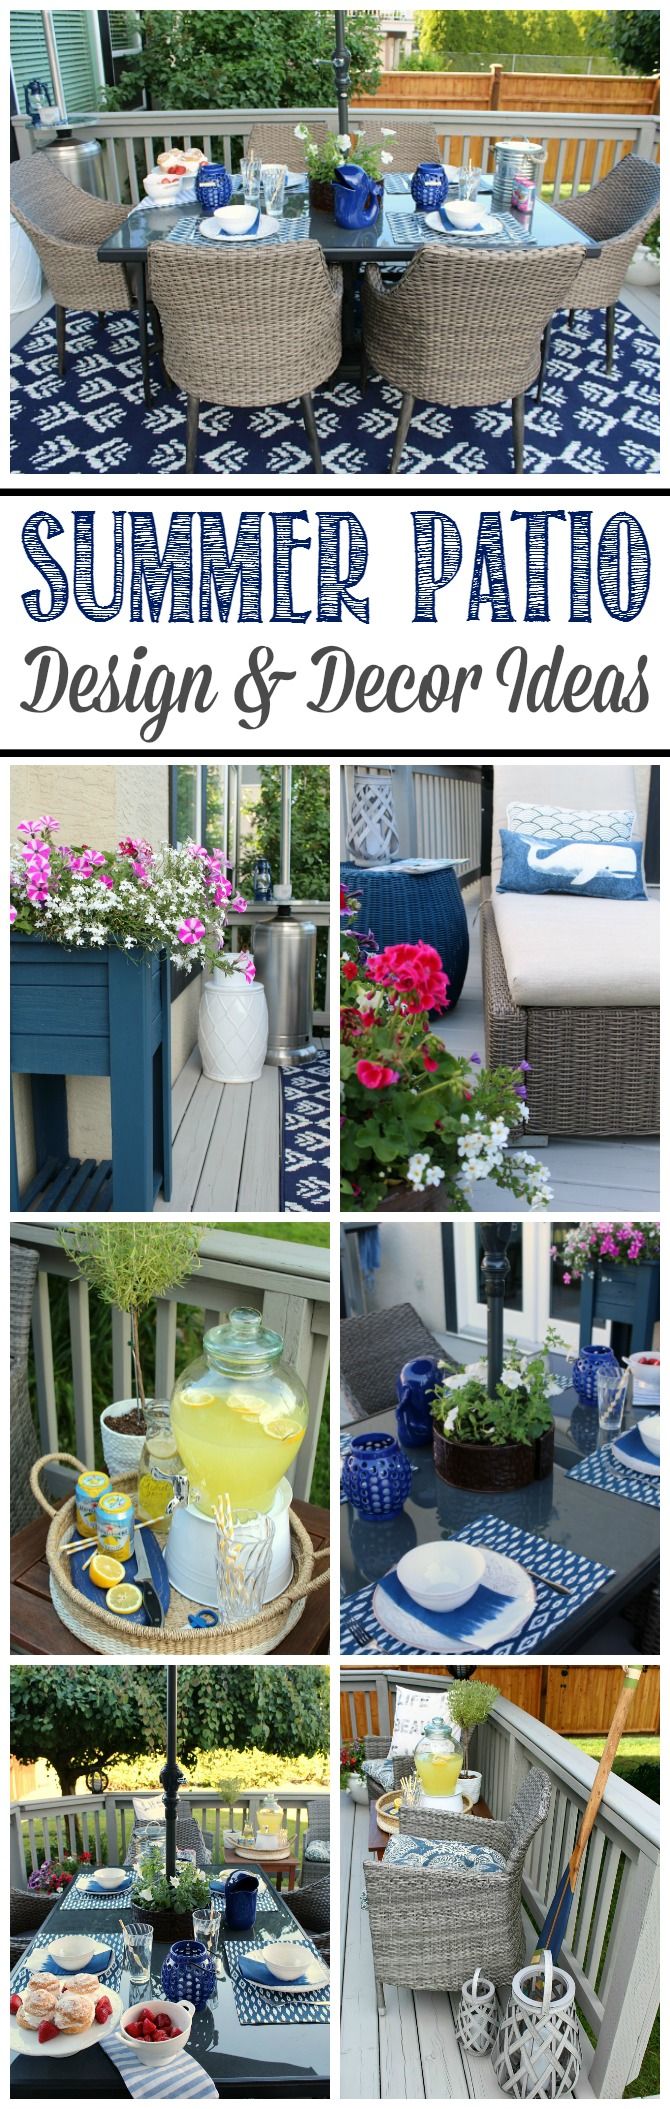 Outdoor Decorating Ideas - May HOD